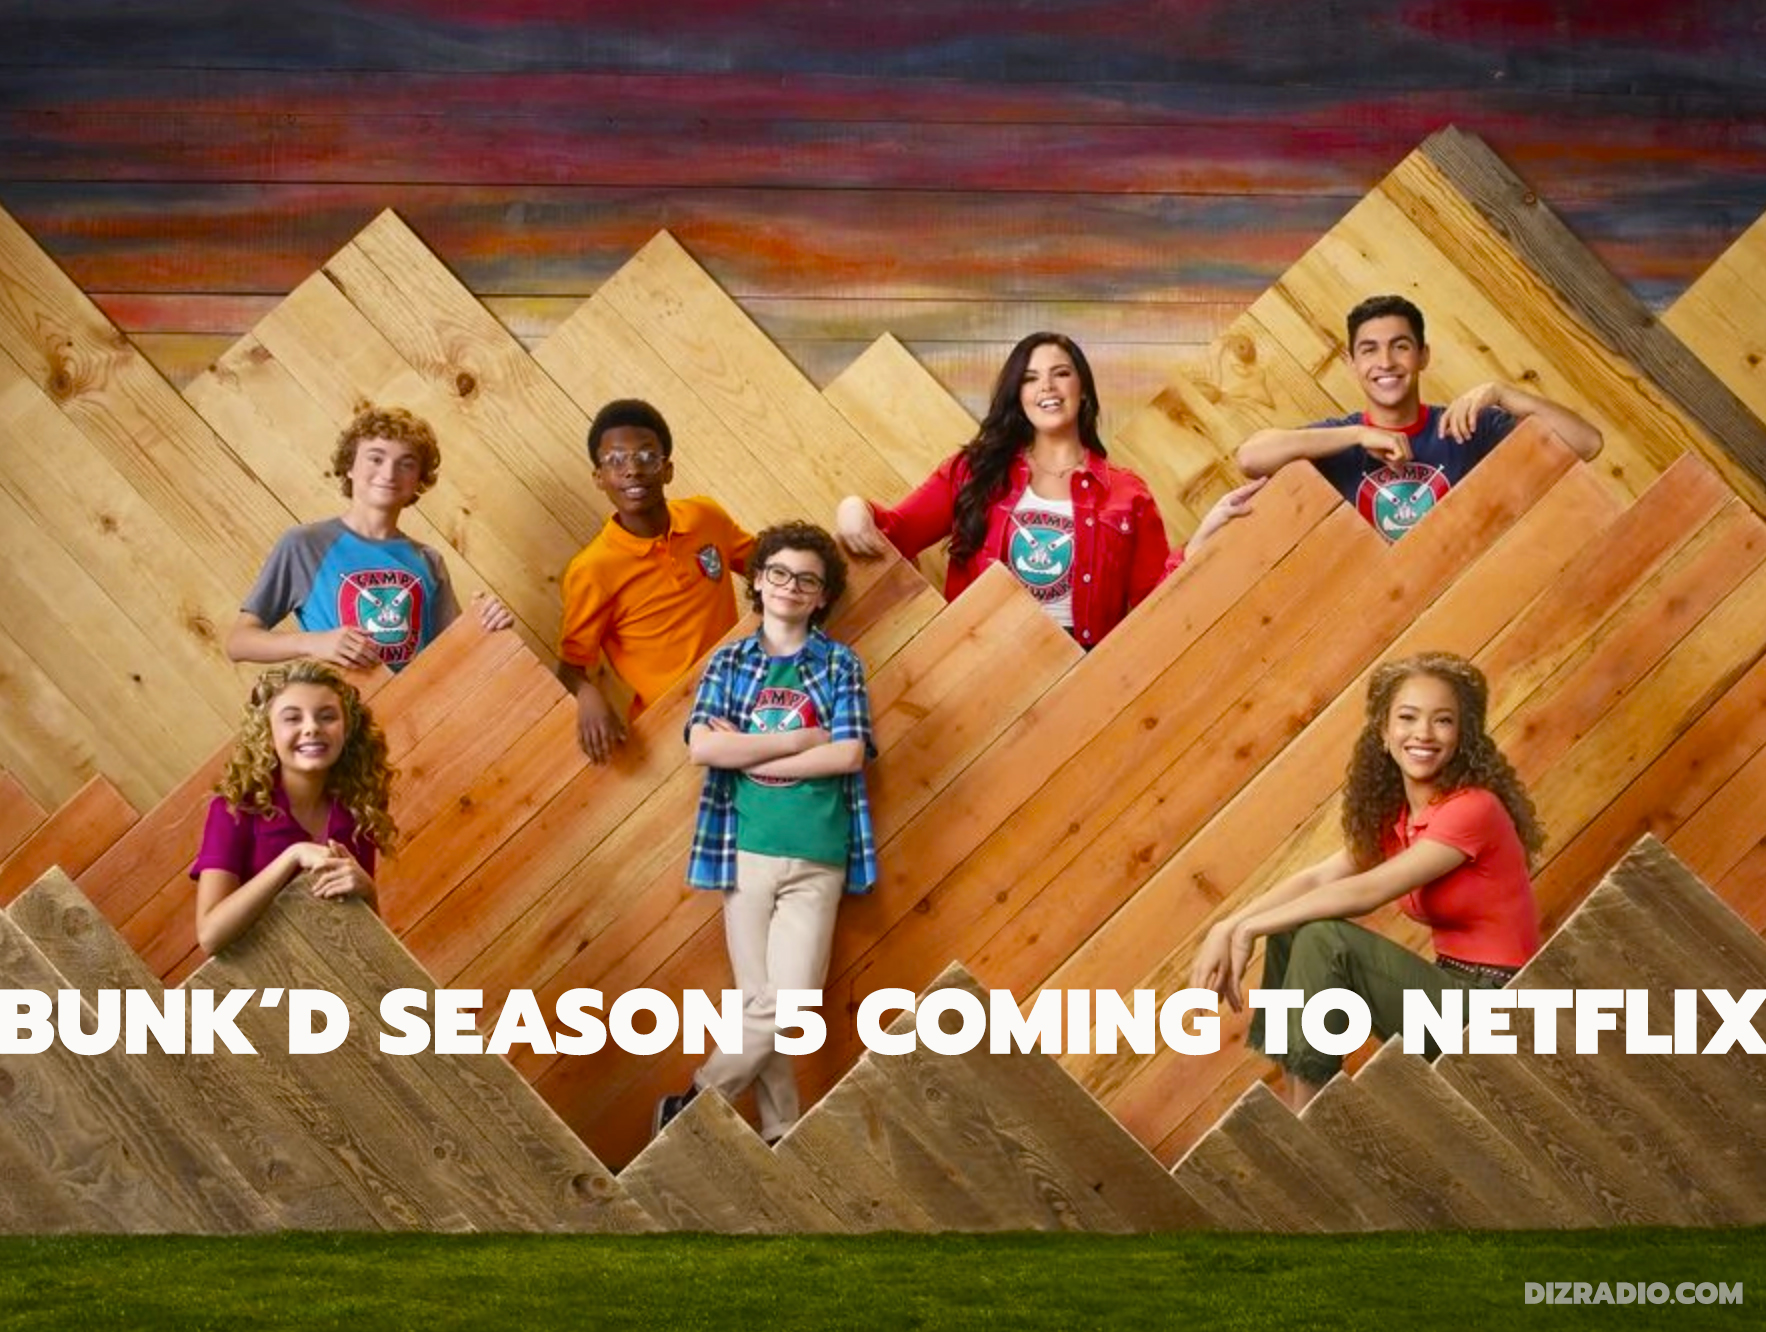 Disney Channel's Bunk’d Season 5 Finishing First Run and Headed to Netflix in September